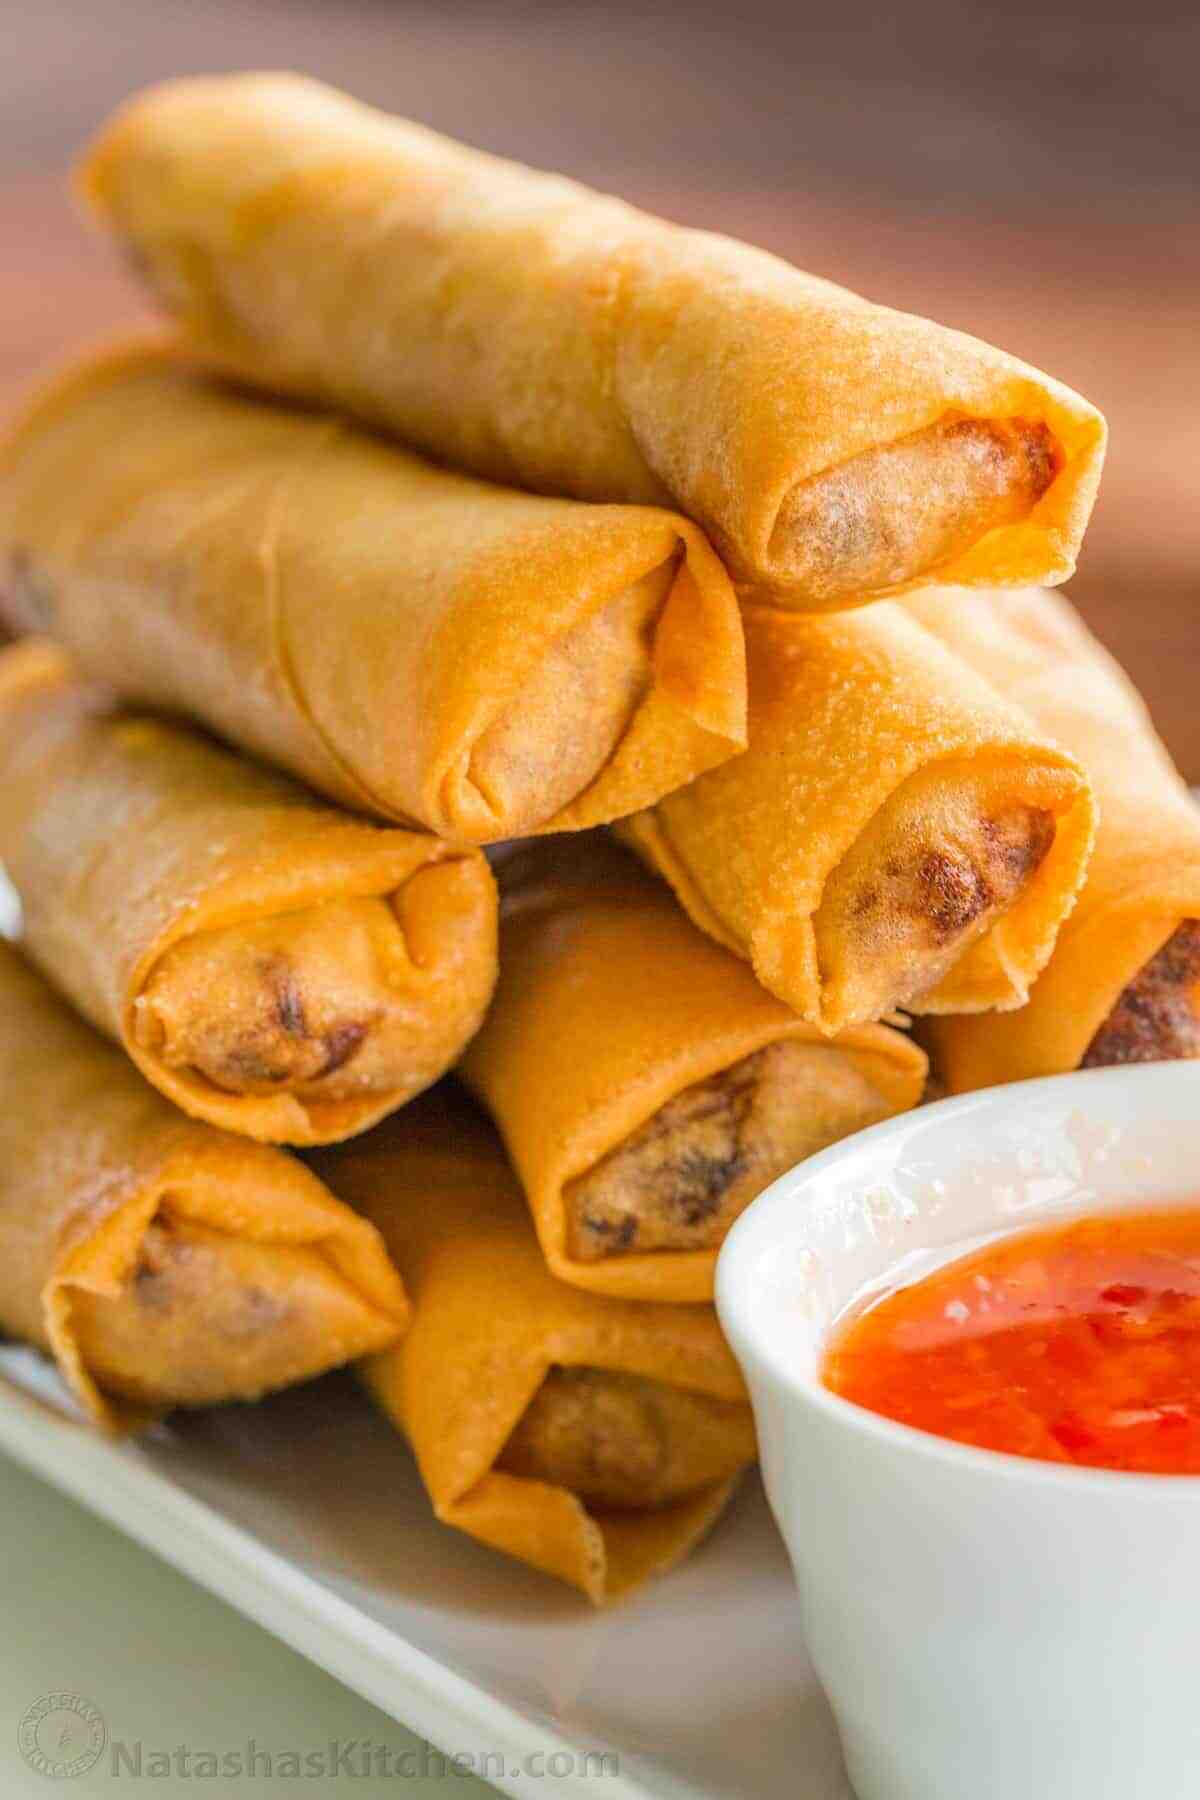 How do you make egg rolls not greasy?